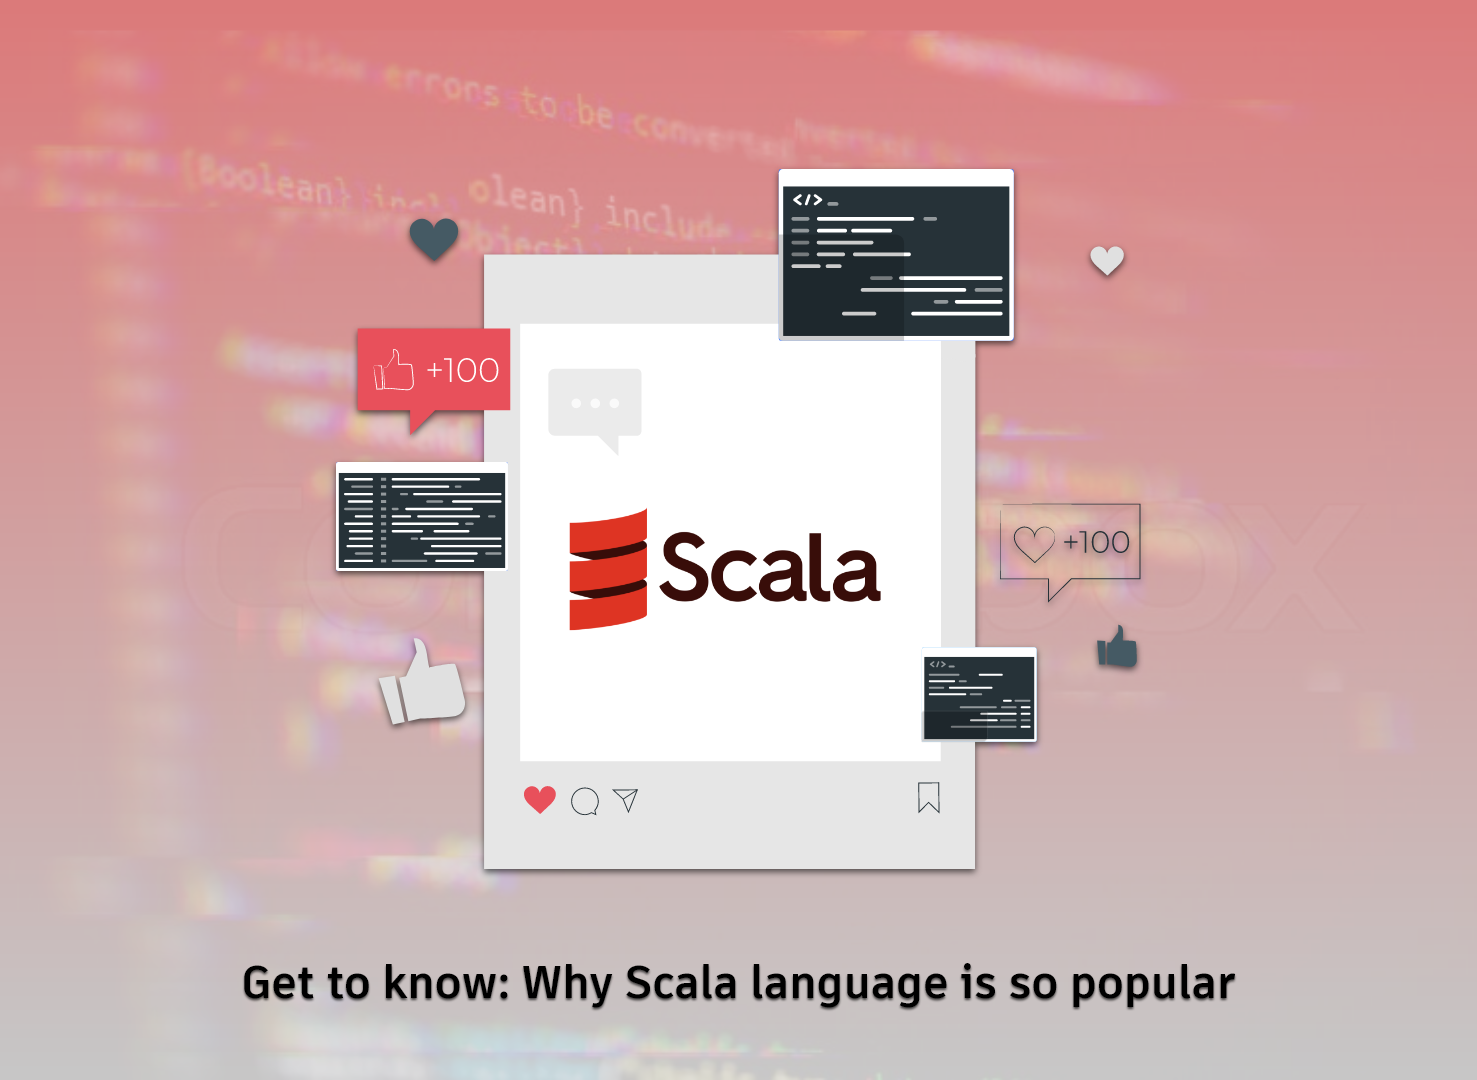 Get To Know: Why Scala Language is So Popular